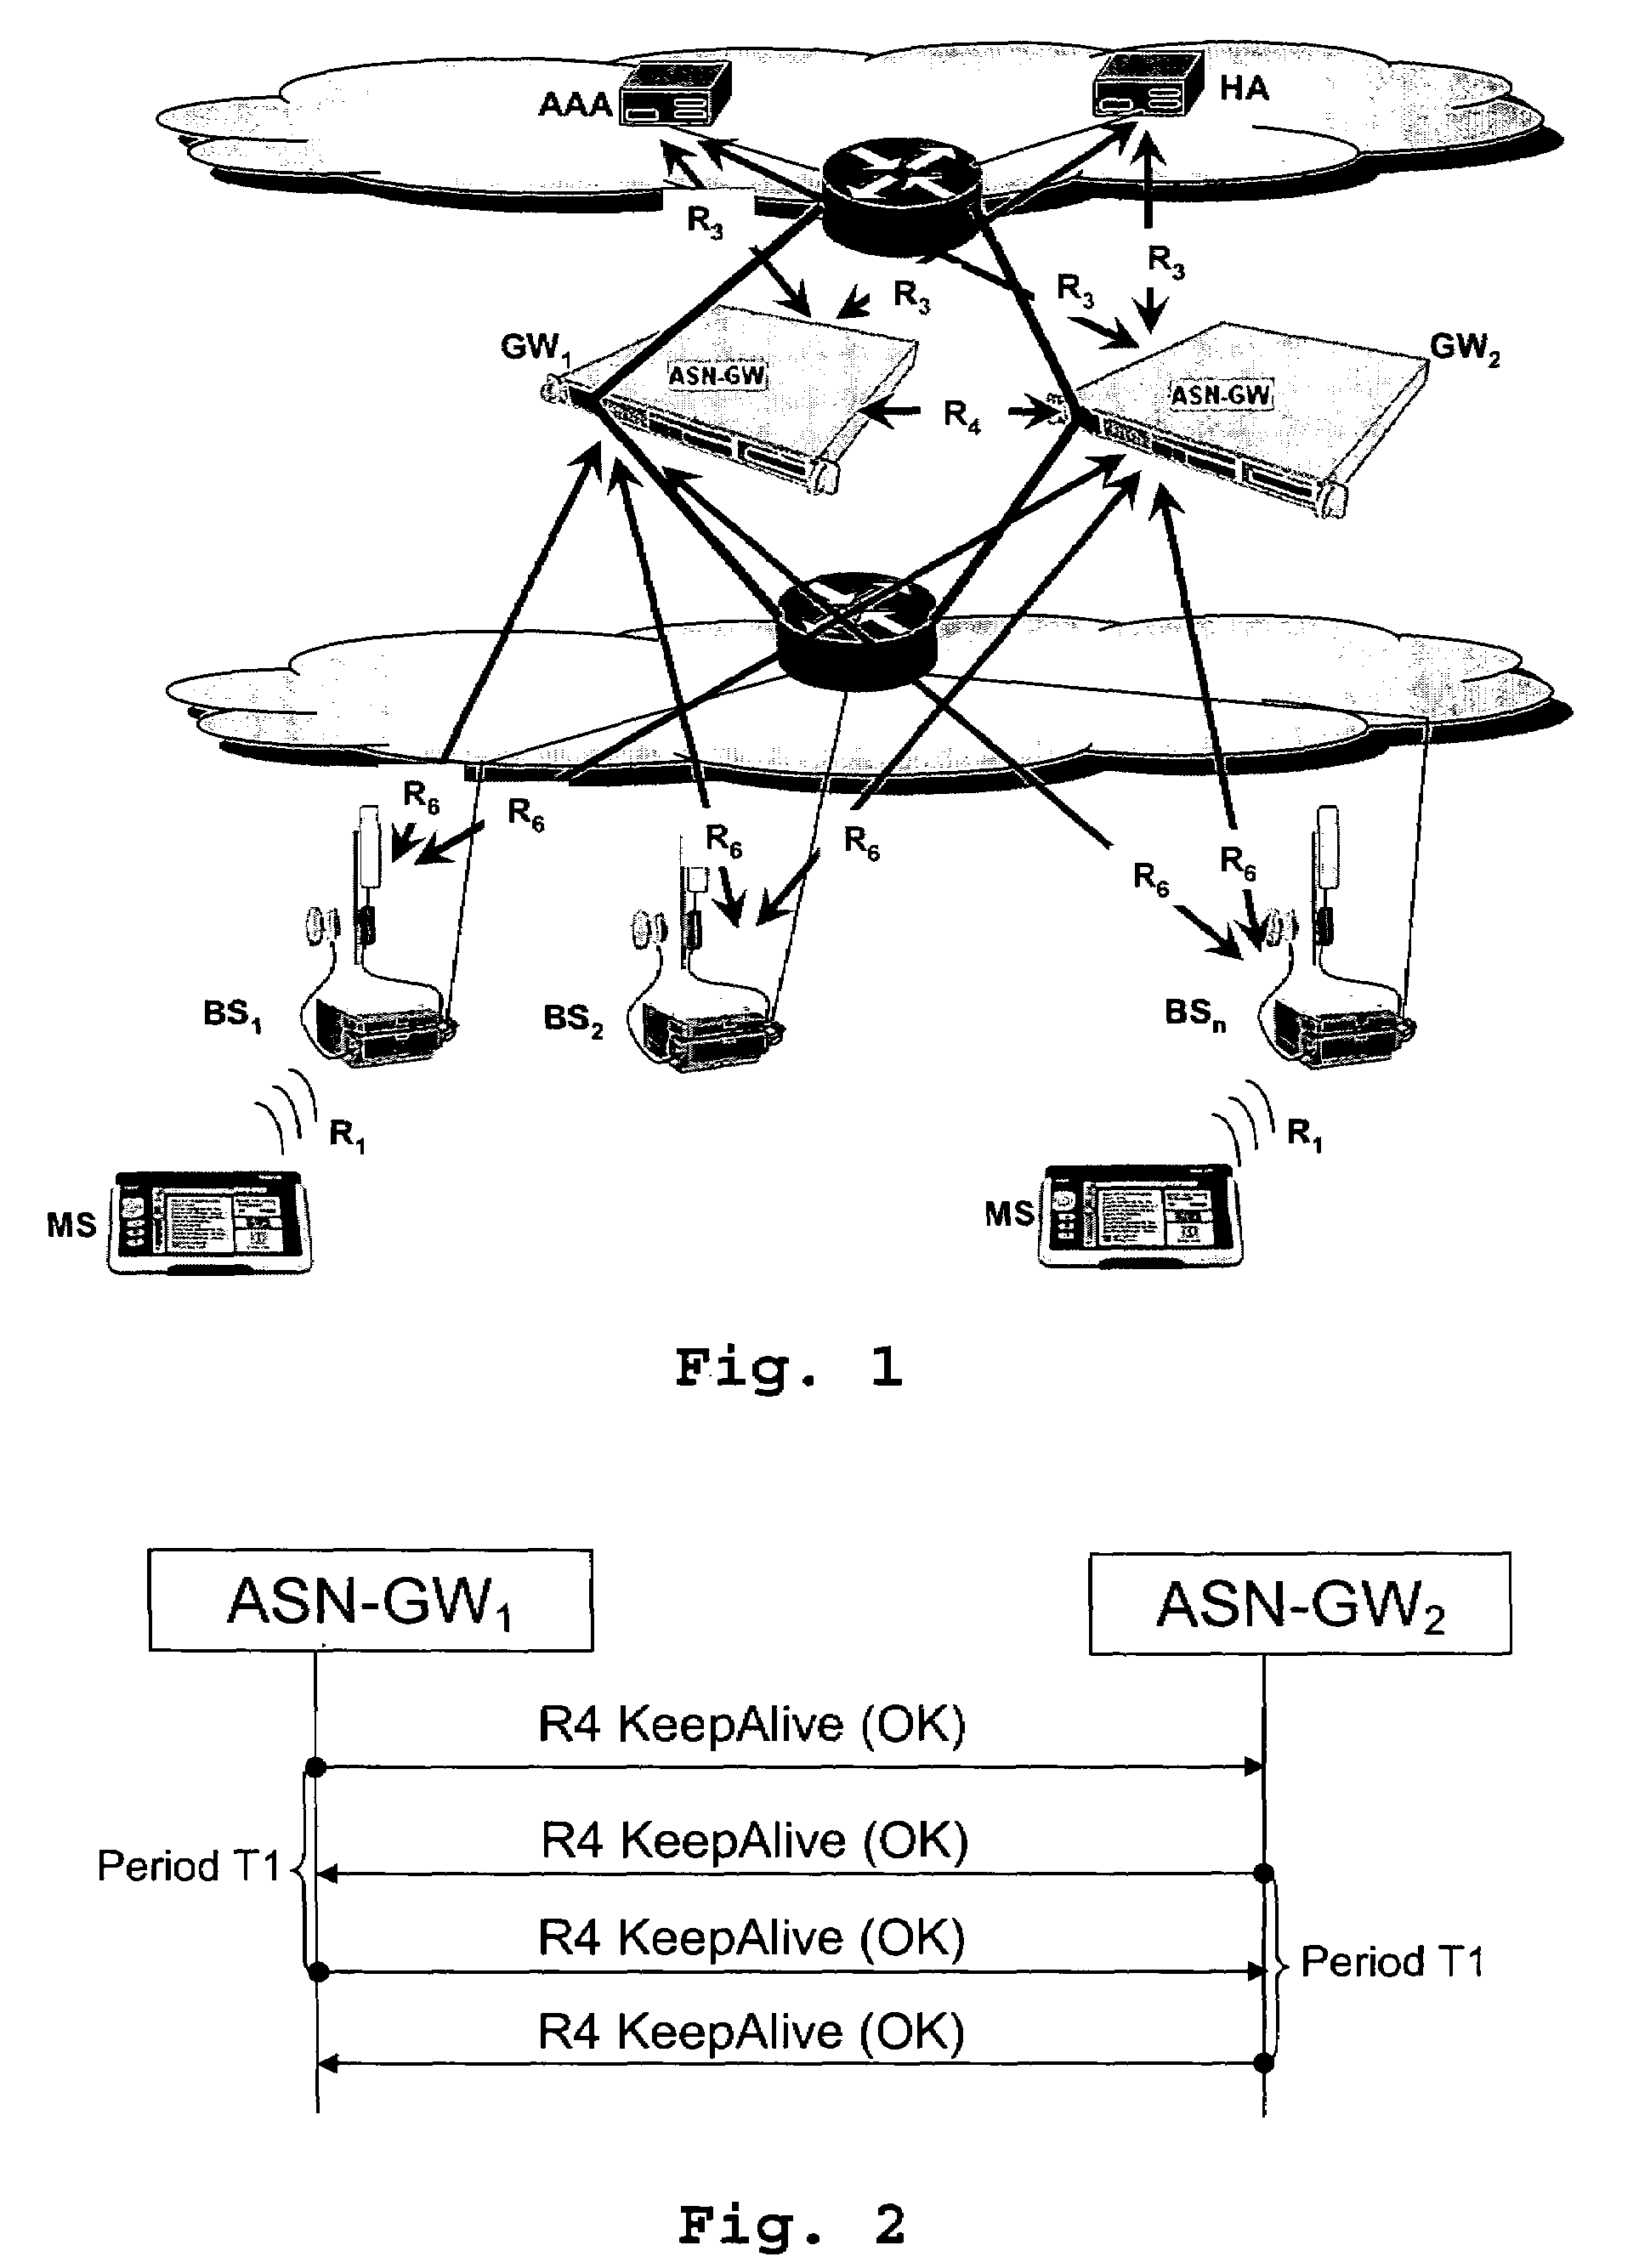 Network-based reliability of mobility gateways